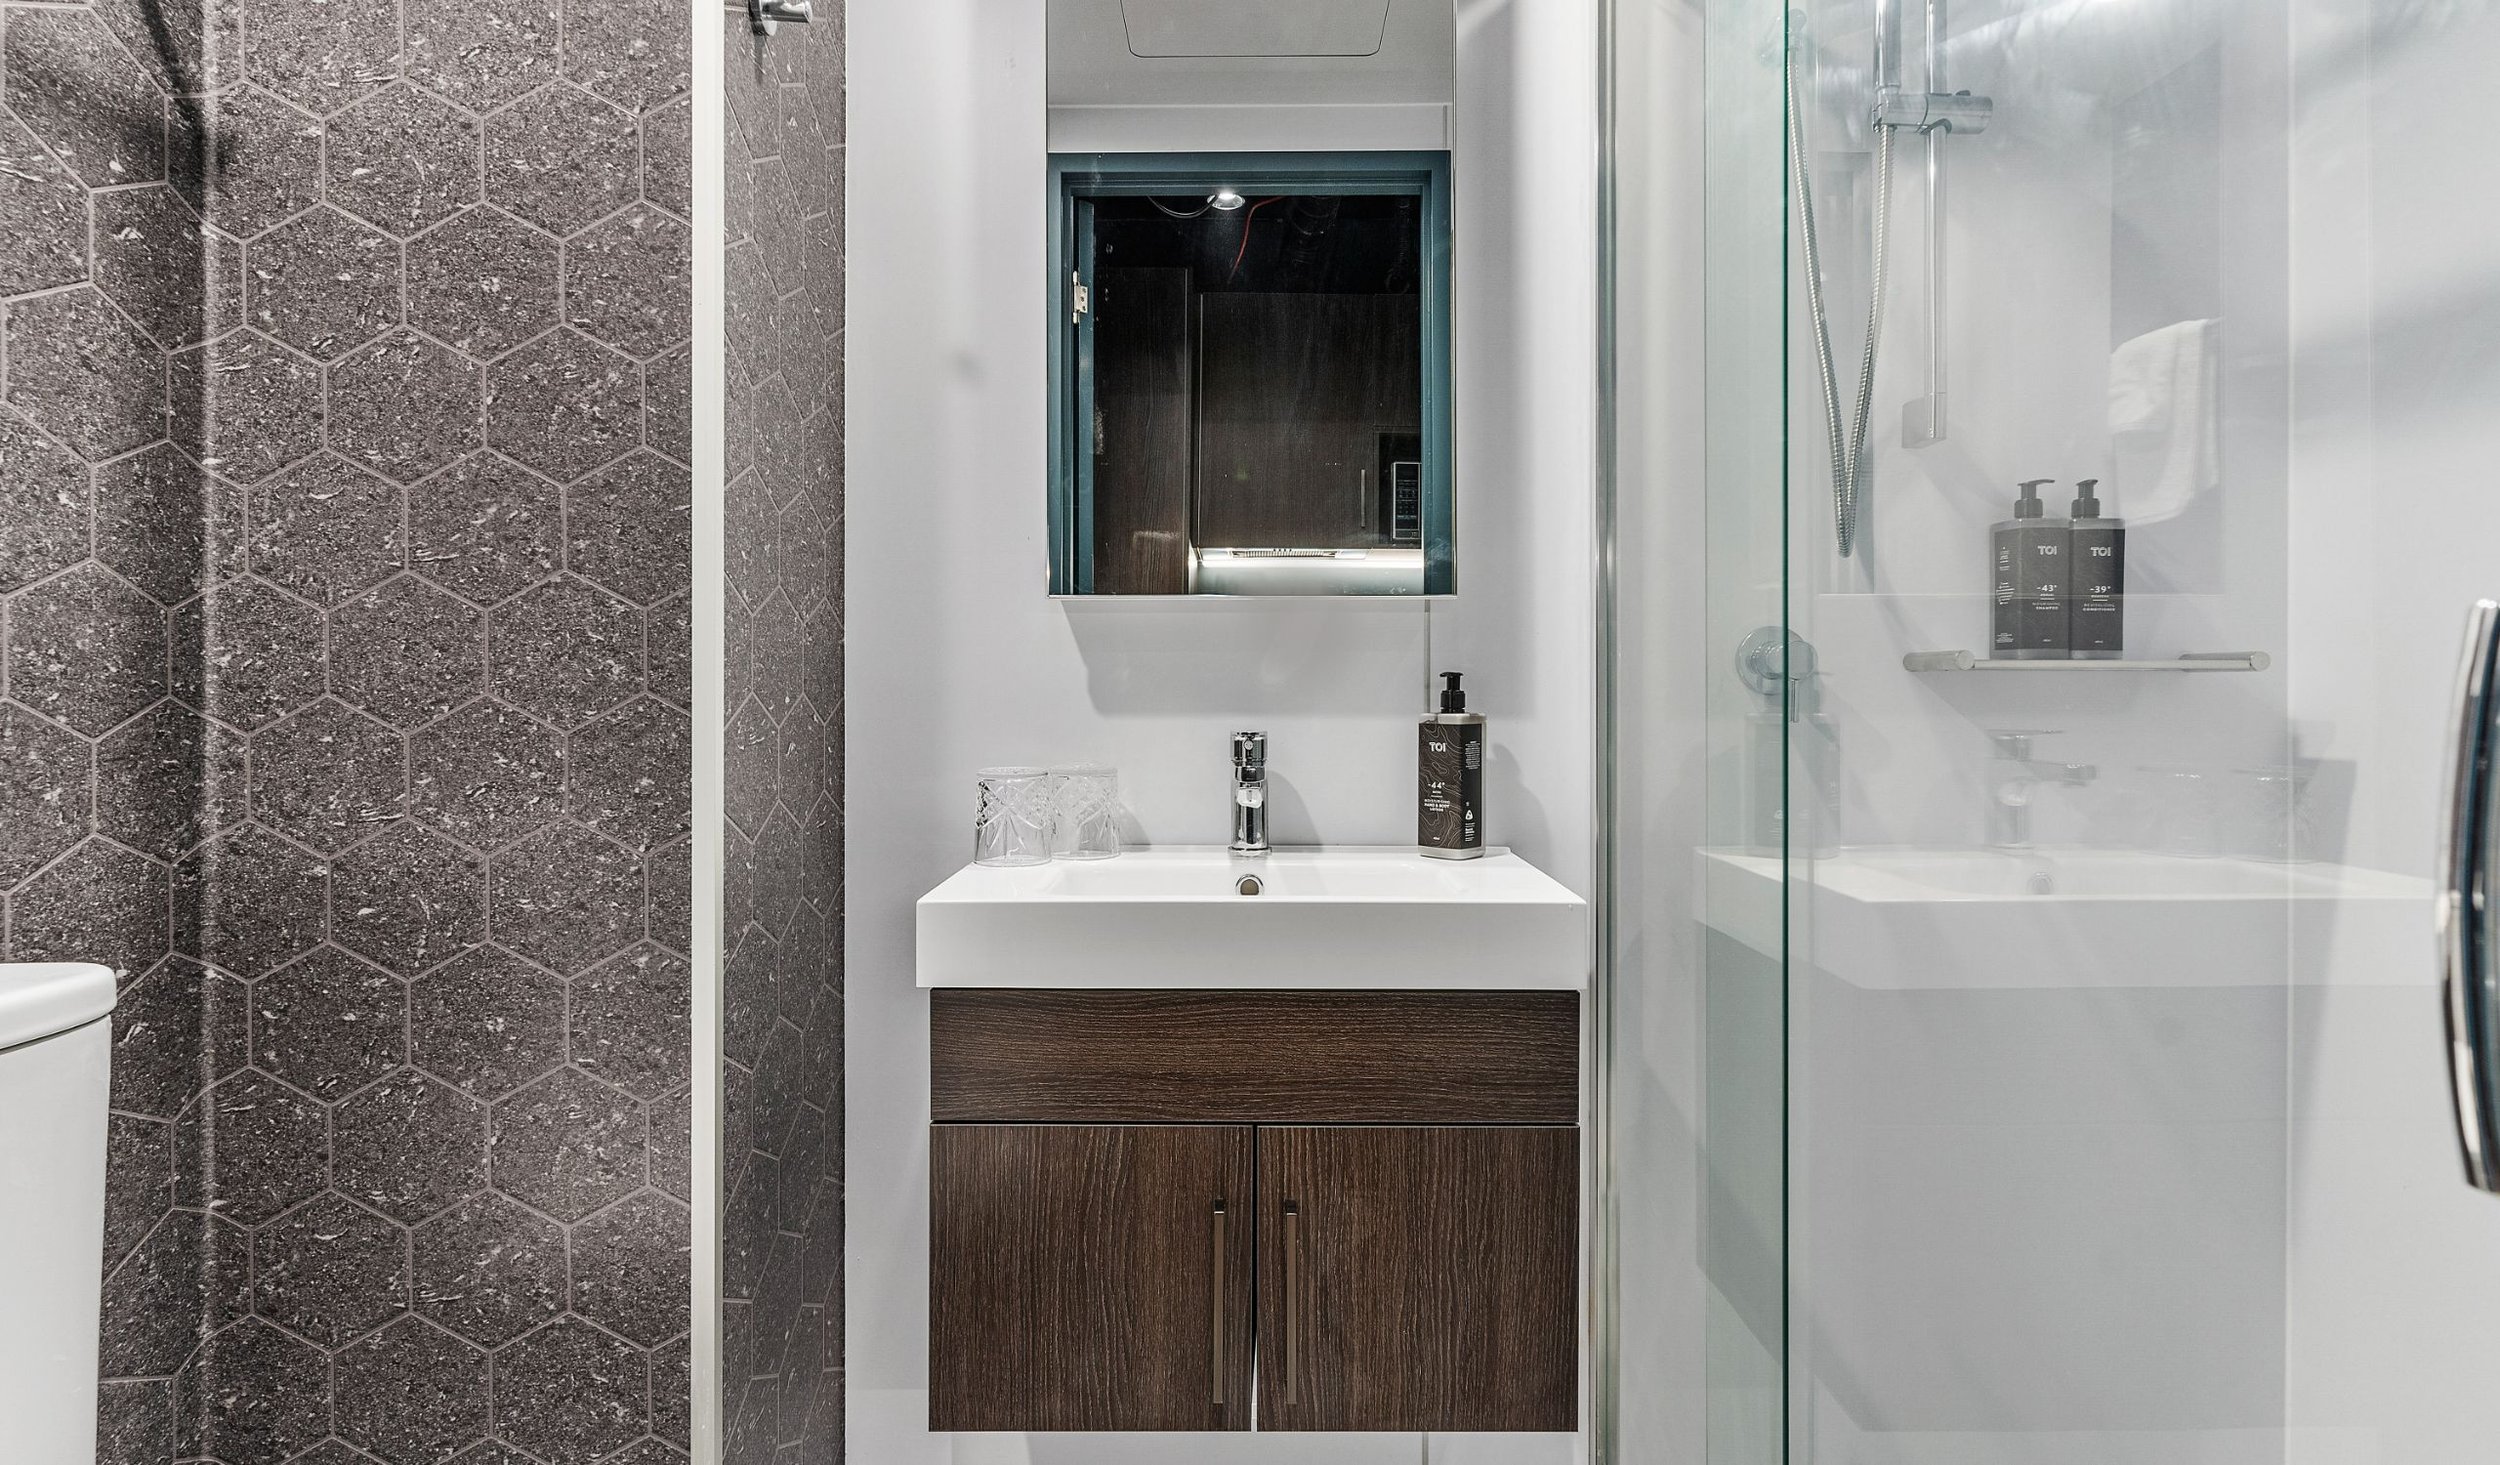 Interior of 2 Bed room bathroom at Abstract Residence in Auckland's CBD